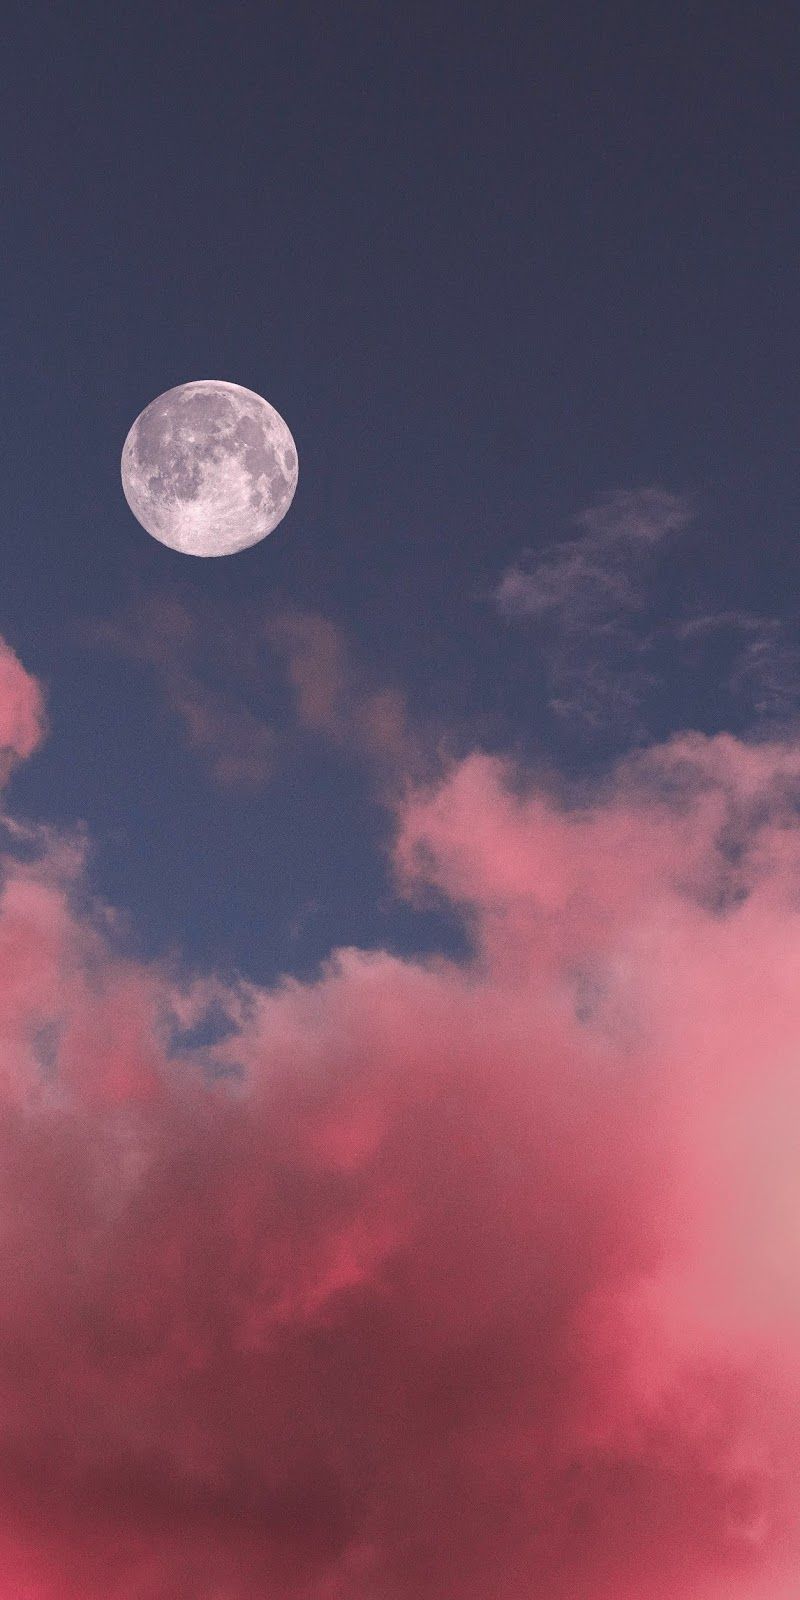 A plane flying over the moon in pink clouds - Moon